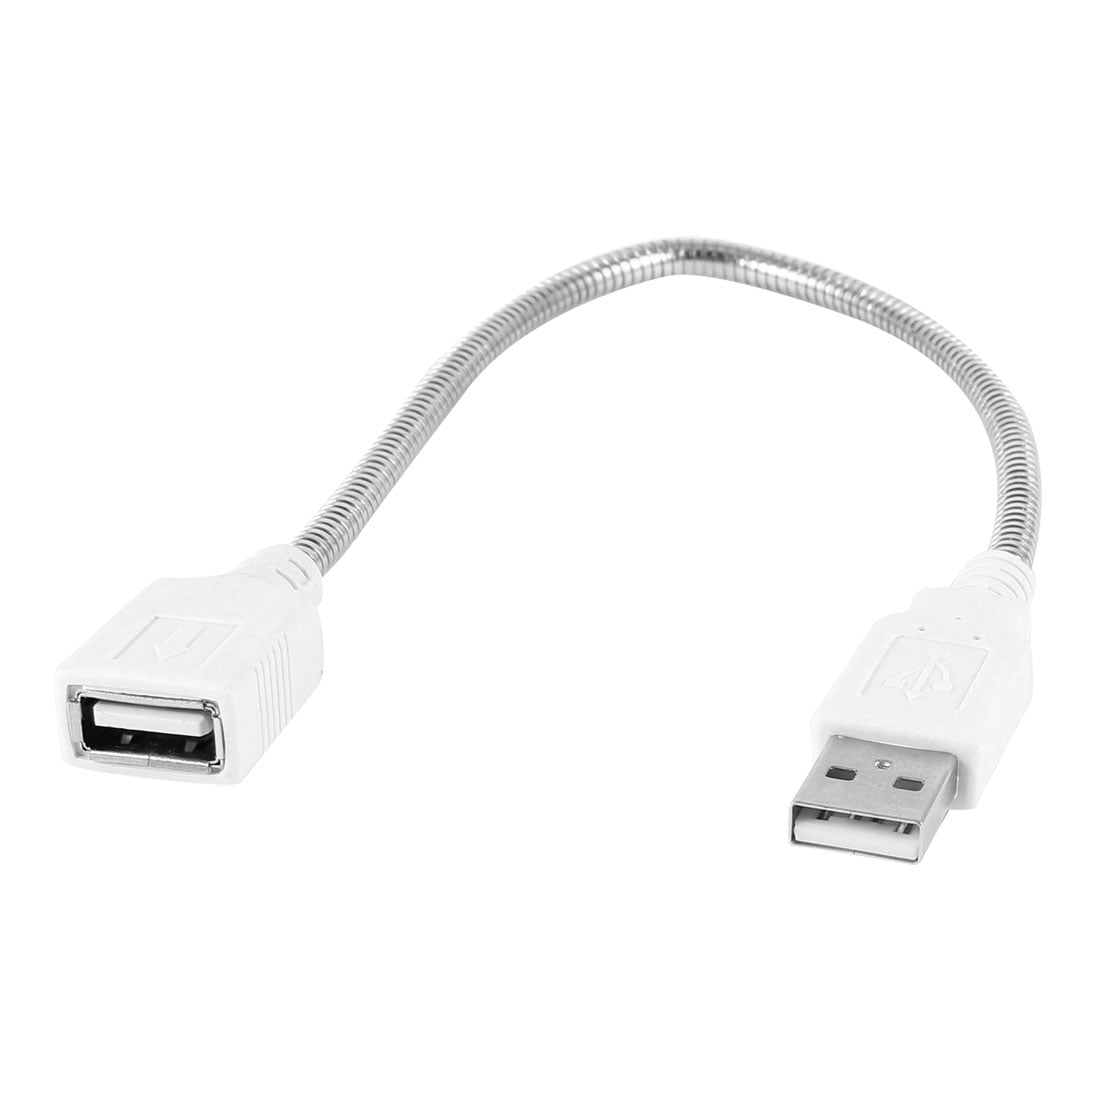 30CM Metal Flexible USB2.0 Male To Female Data Power Cord Stand Extension Cable